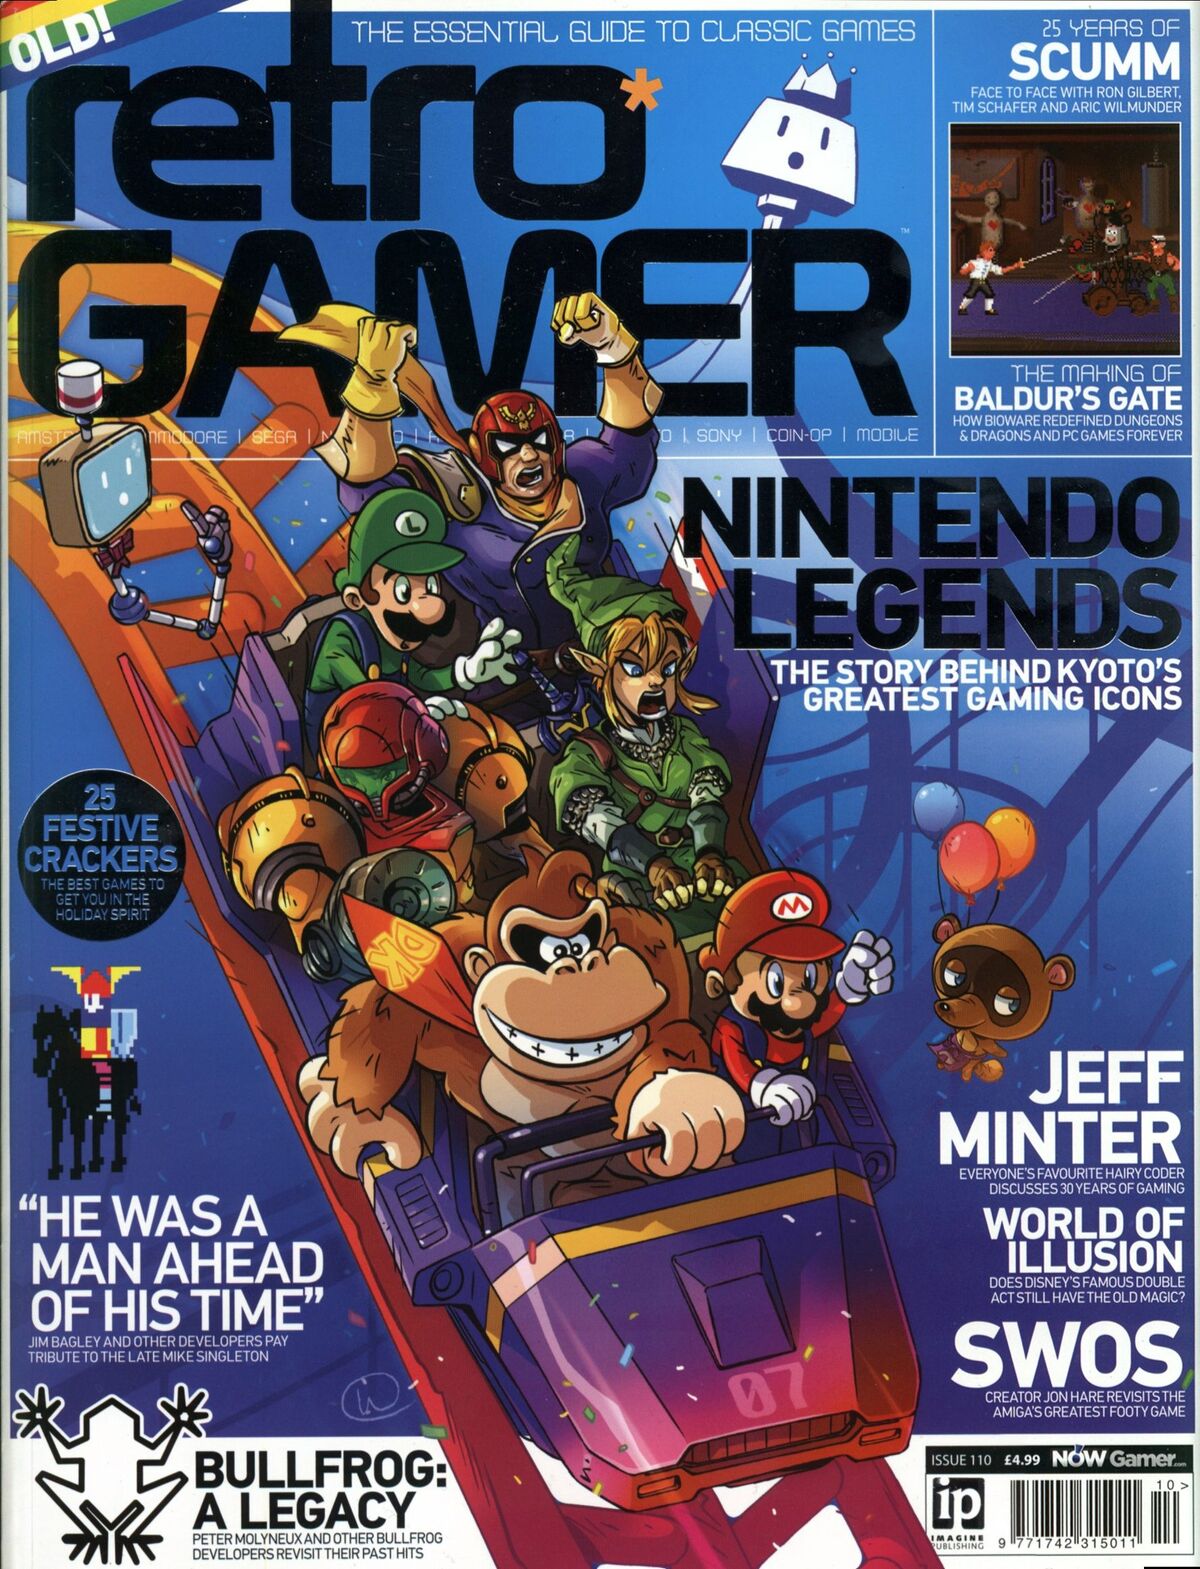 To Mod Or Not To Mod? That Is The Question. - Old School Gamer Magazine